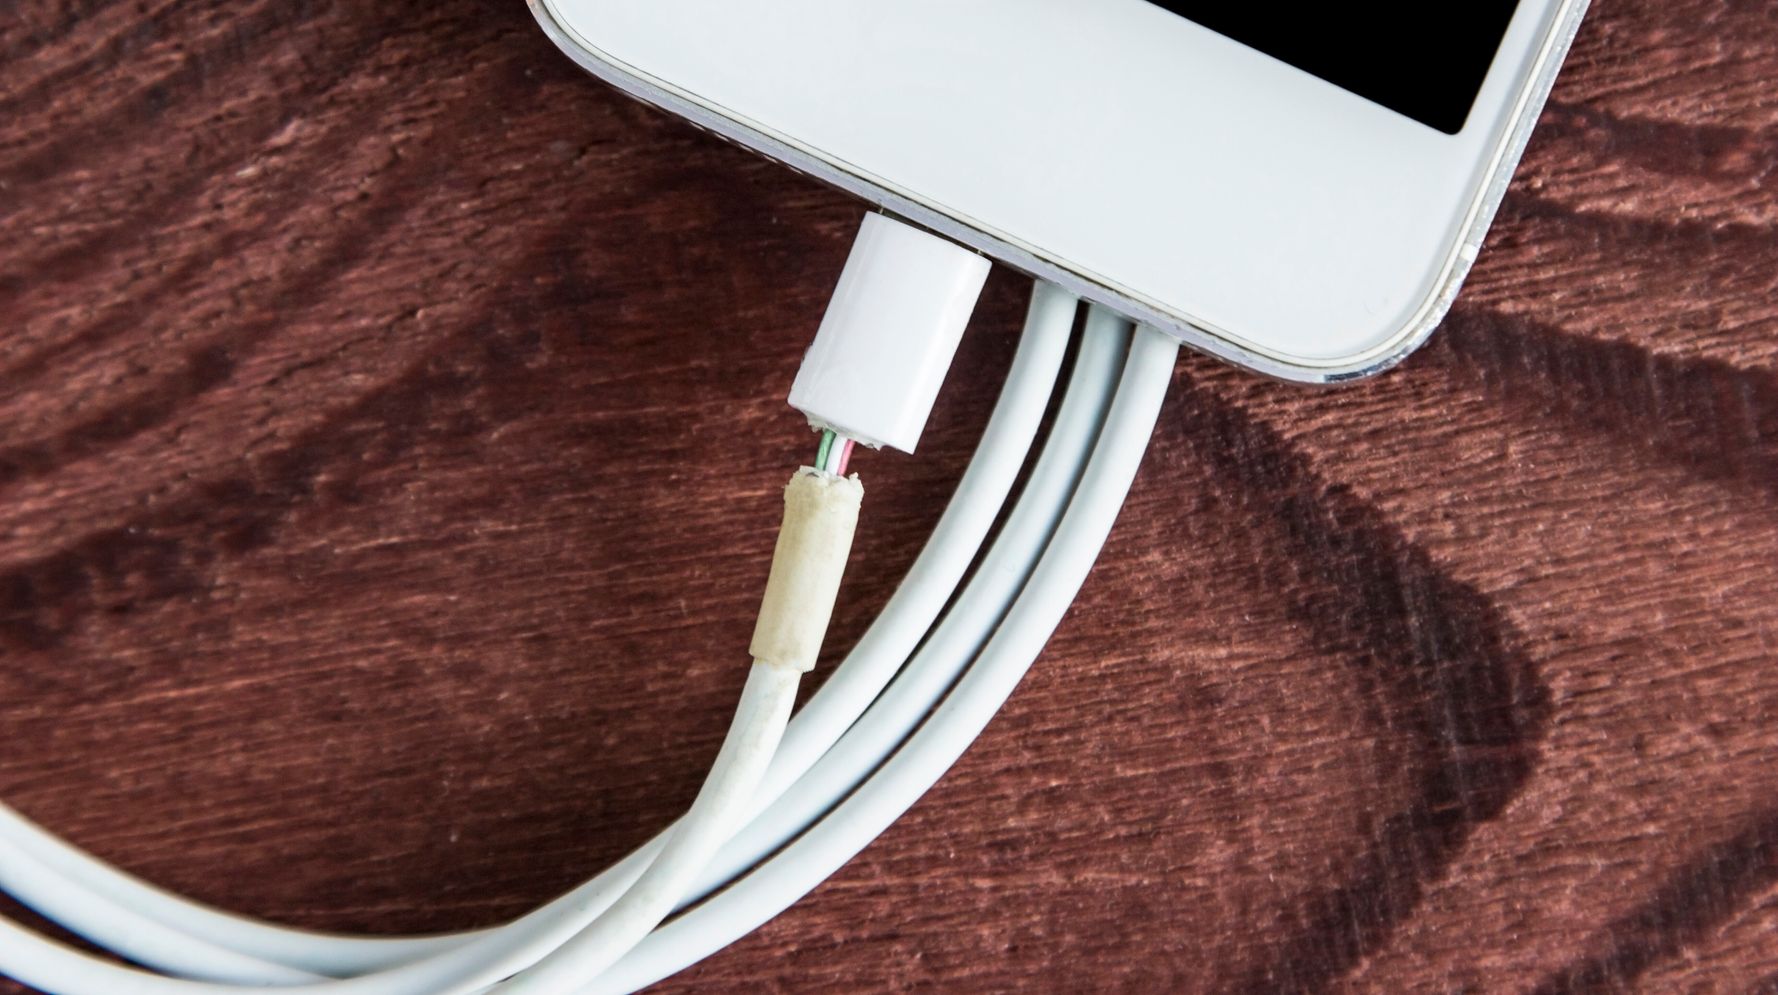 Woman Suffers Severe Burns After Phone Charger Zaps Her Necklace - HuffPost thumbnail